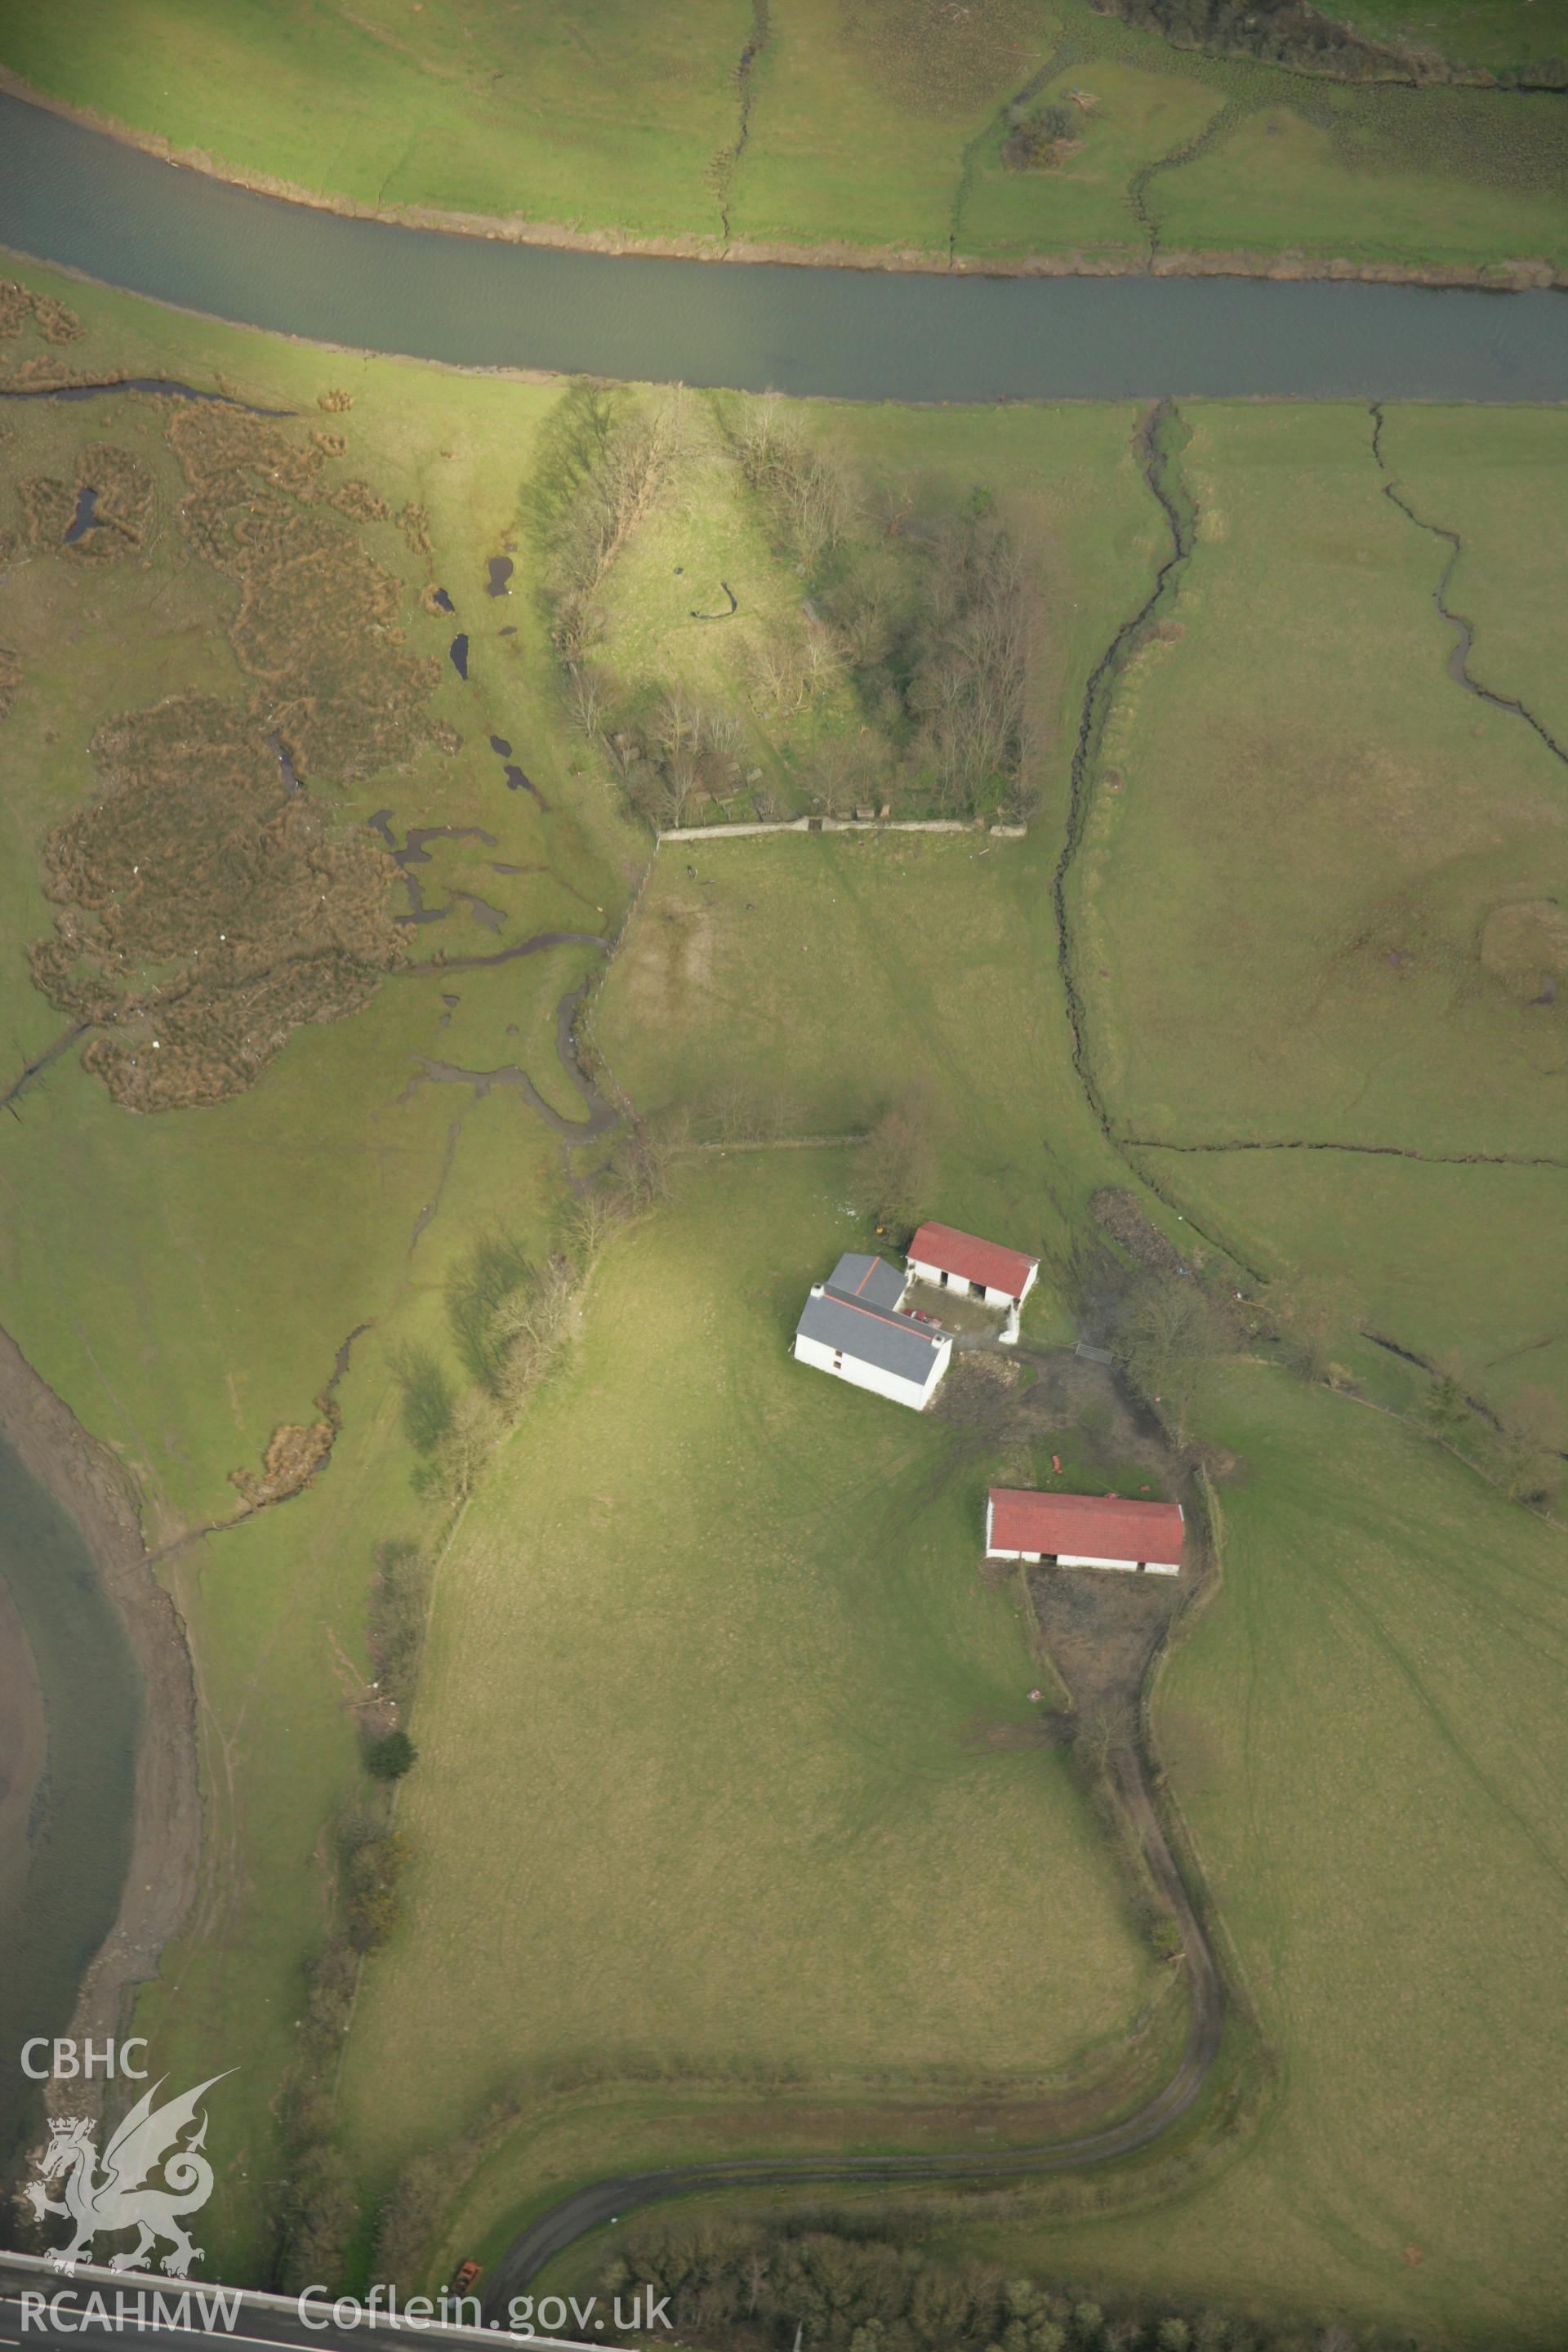 RCAHMW colour oblique aerial photograph of St Teilo's Church, Llandeilo Talybont. Taken on 16 March 2007 by Toby Driver